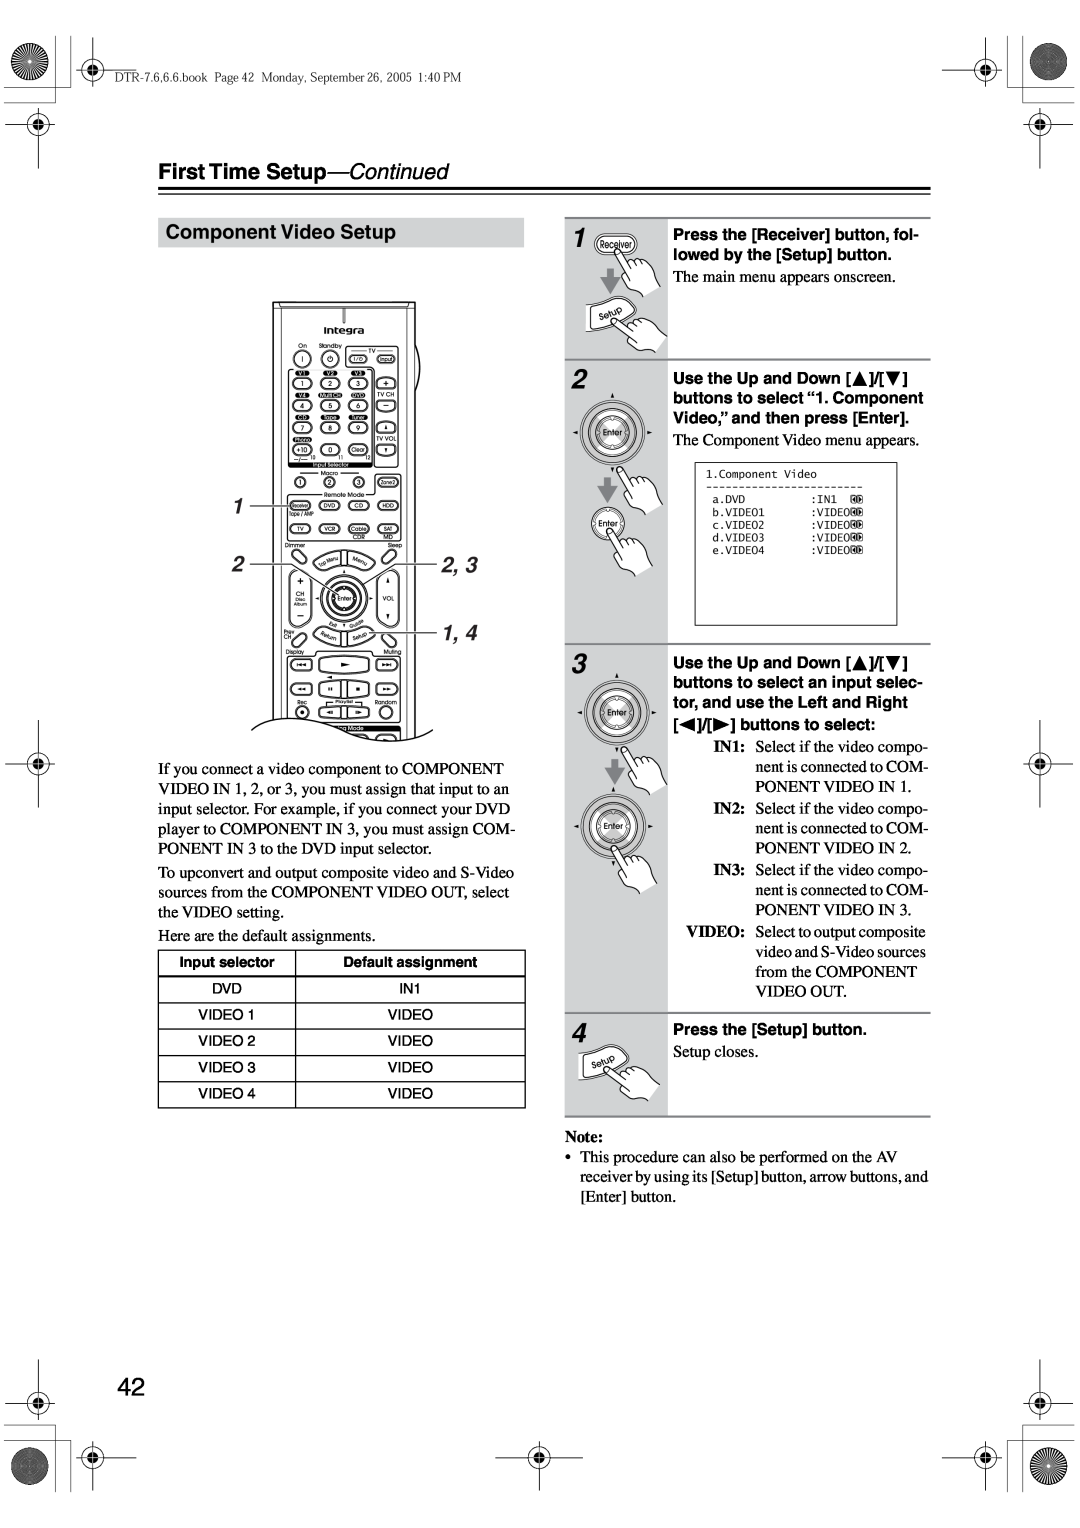 Integra DTR-7.6/6.6 instruction manual 1 22, 1, Component Video Setup, First Time Setup—Continued 